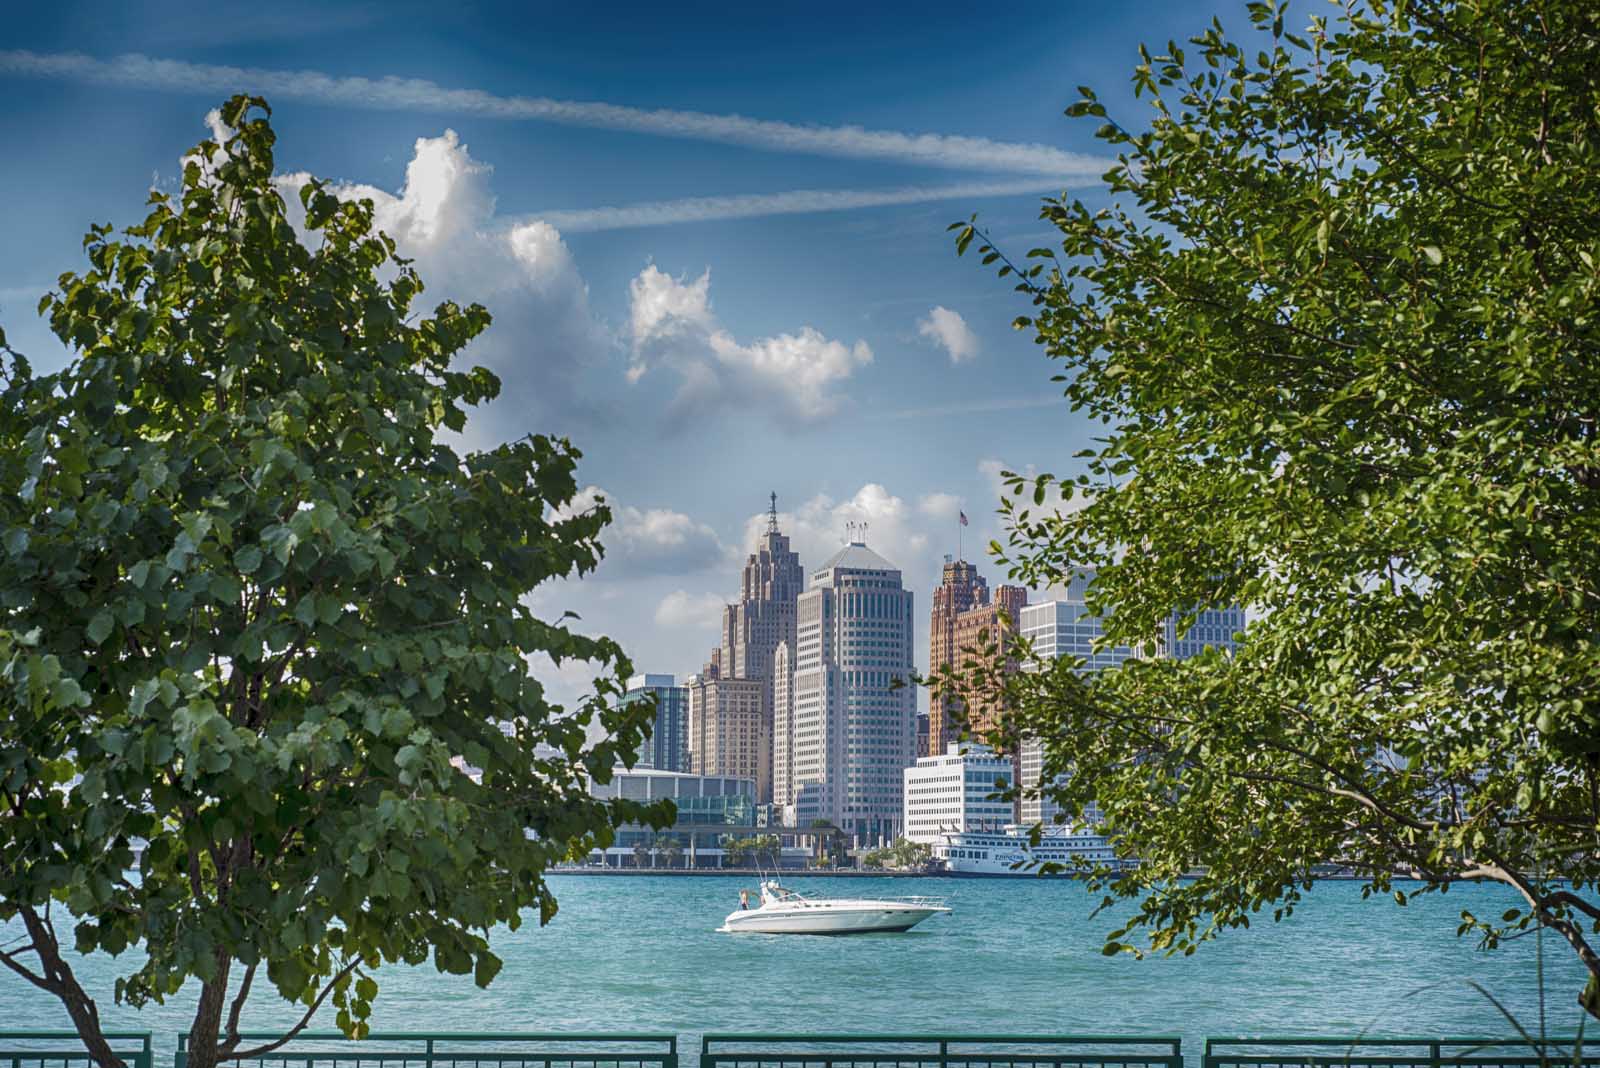 Best Things to do in Windsor Boat Tour on Detroit River